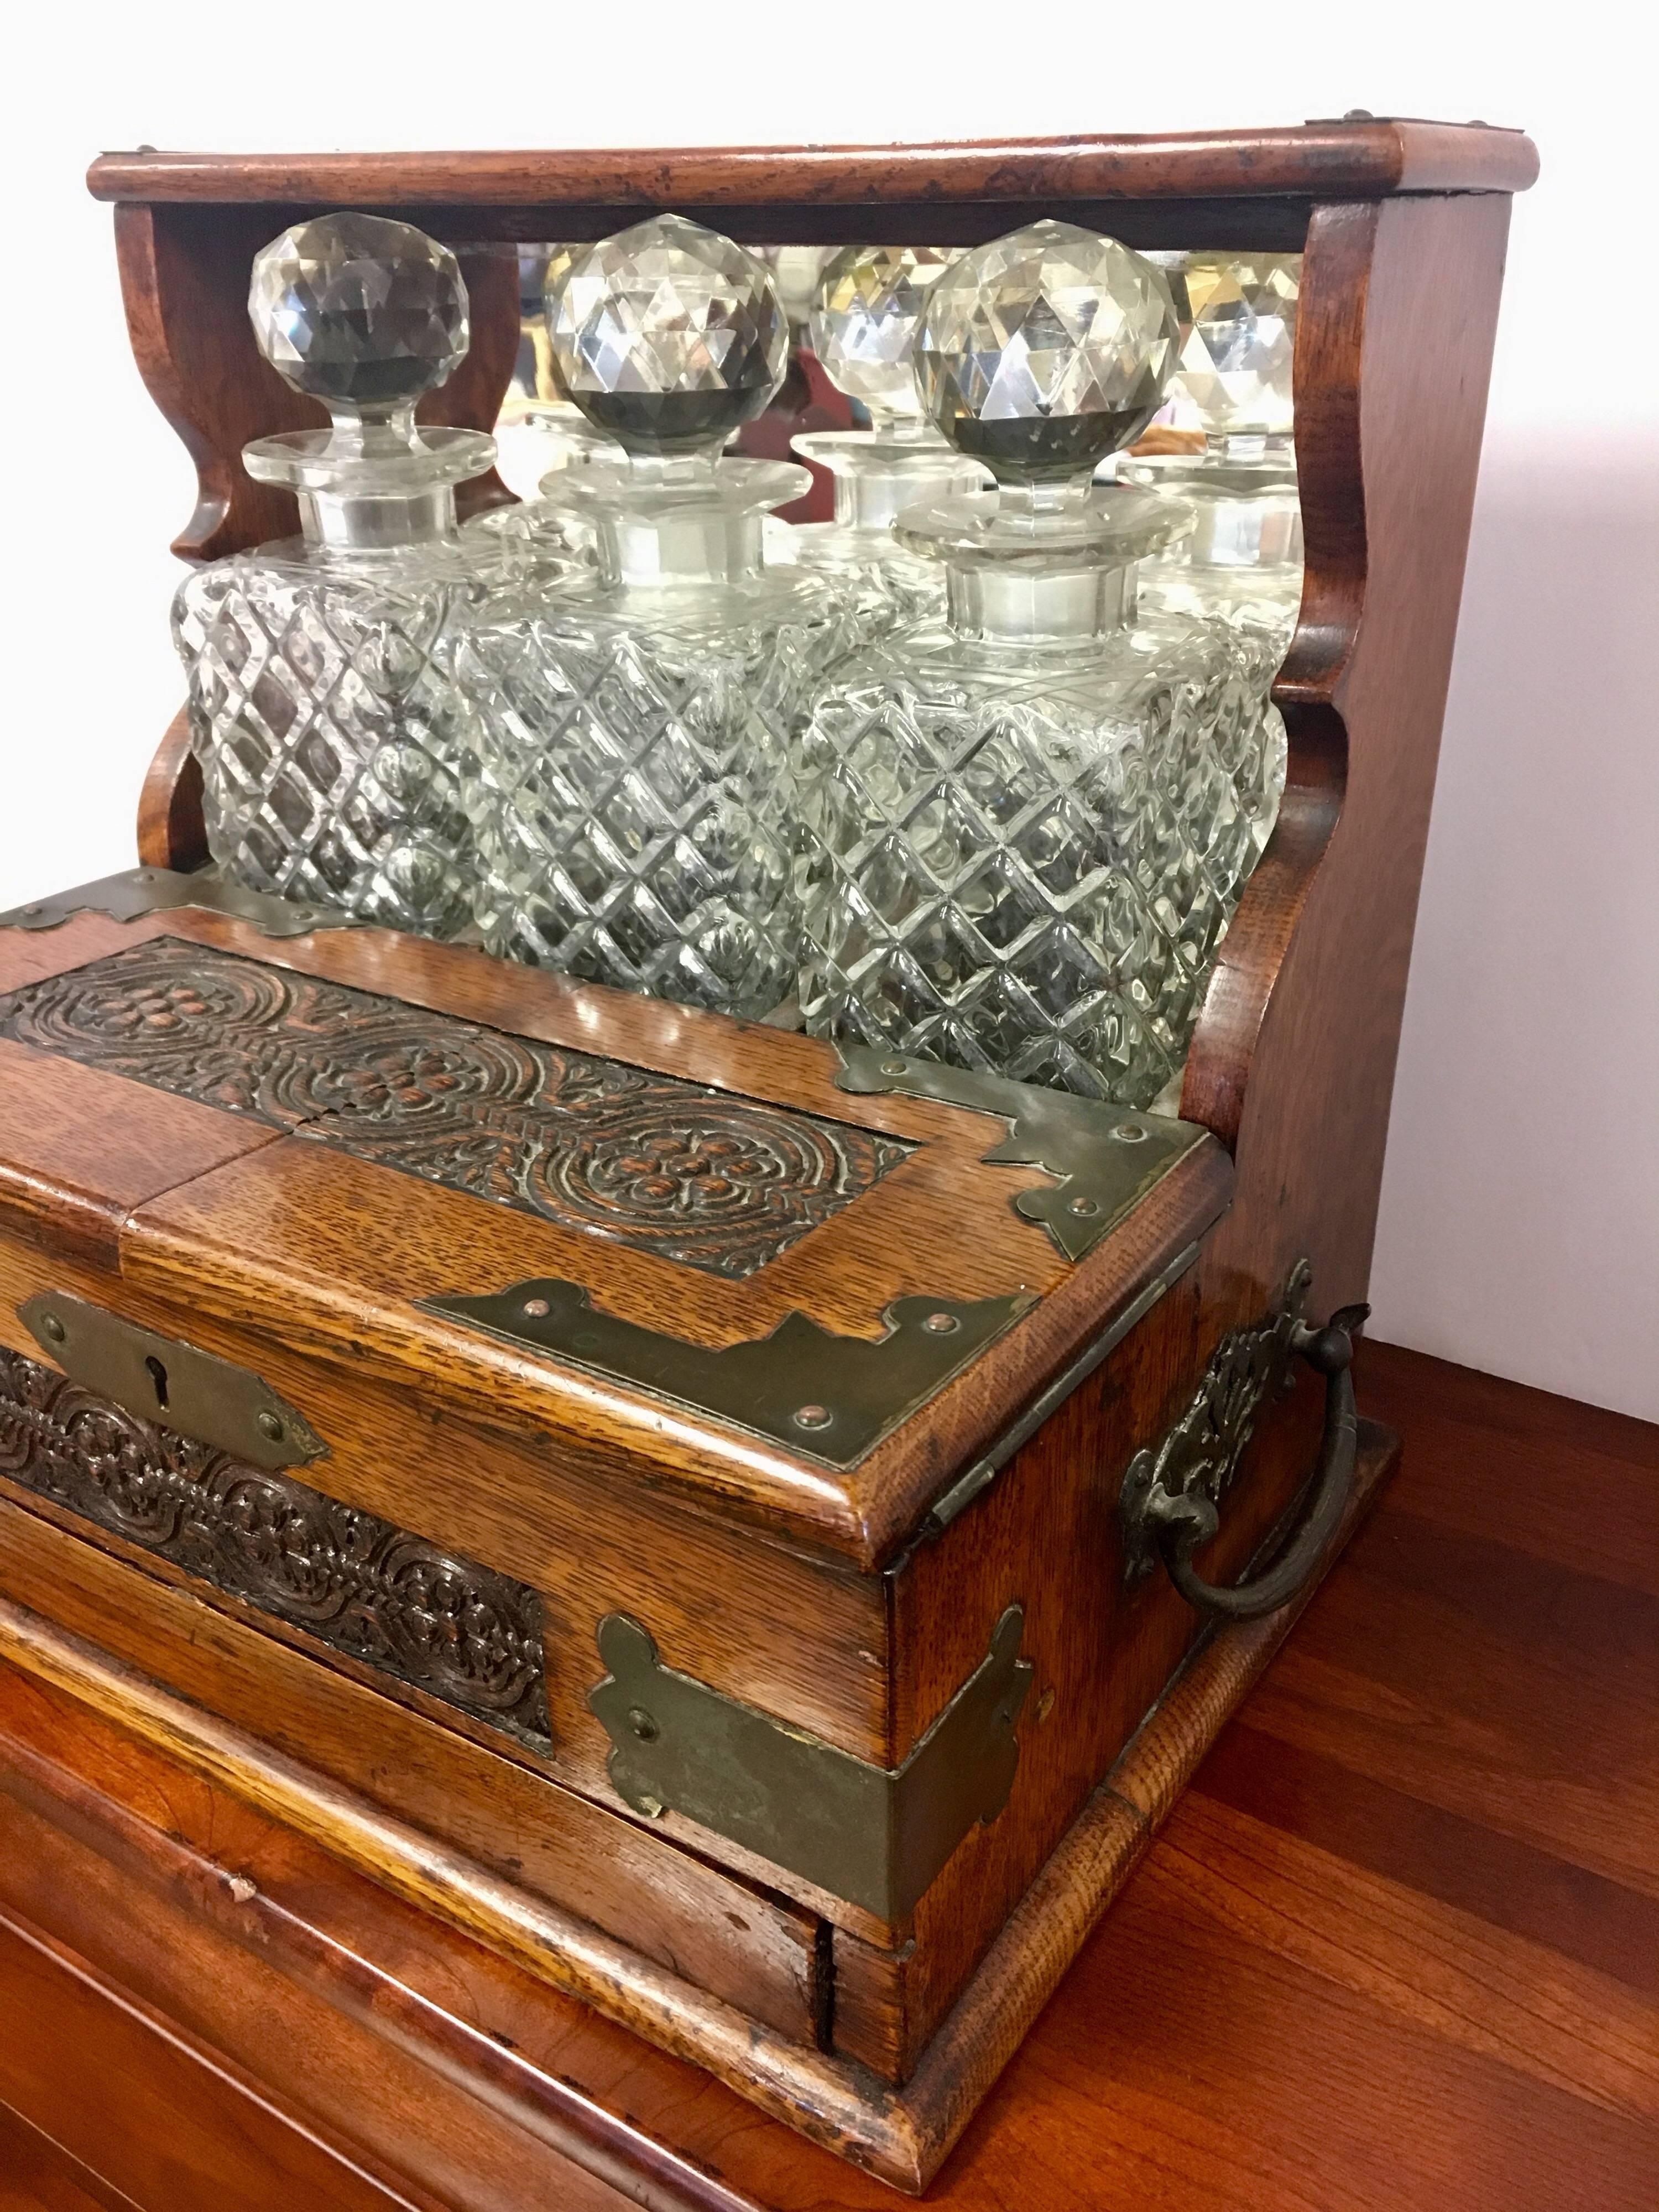 Ultra rare 19th century English oak and crystal tantalus decanter set with hidden lower drawer that pops open when wooden button is depressed to show a cribbage board.
 